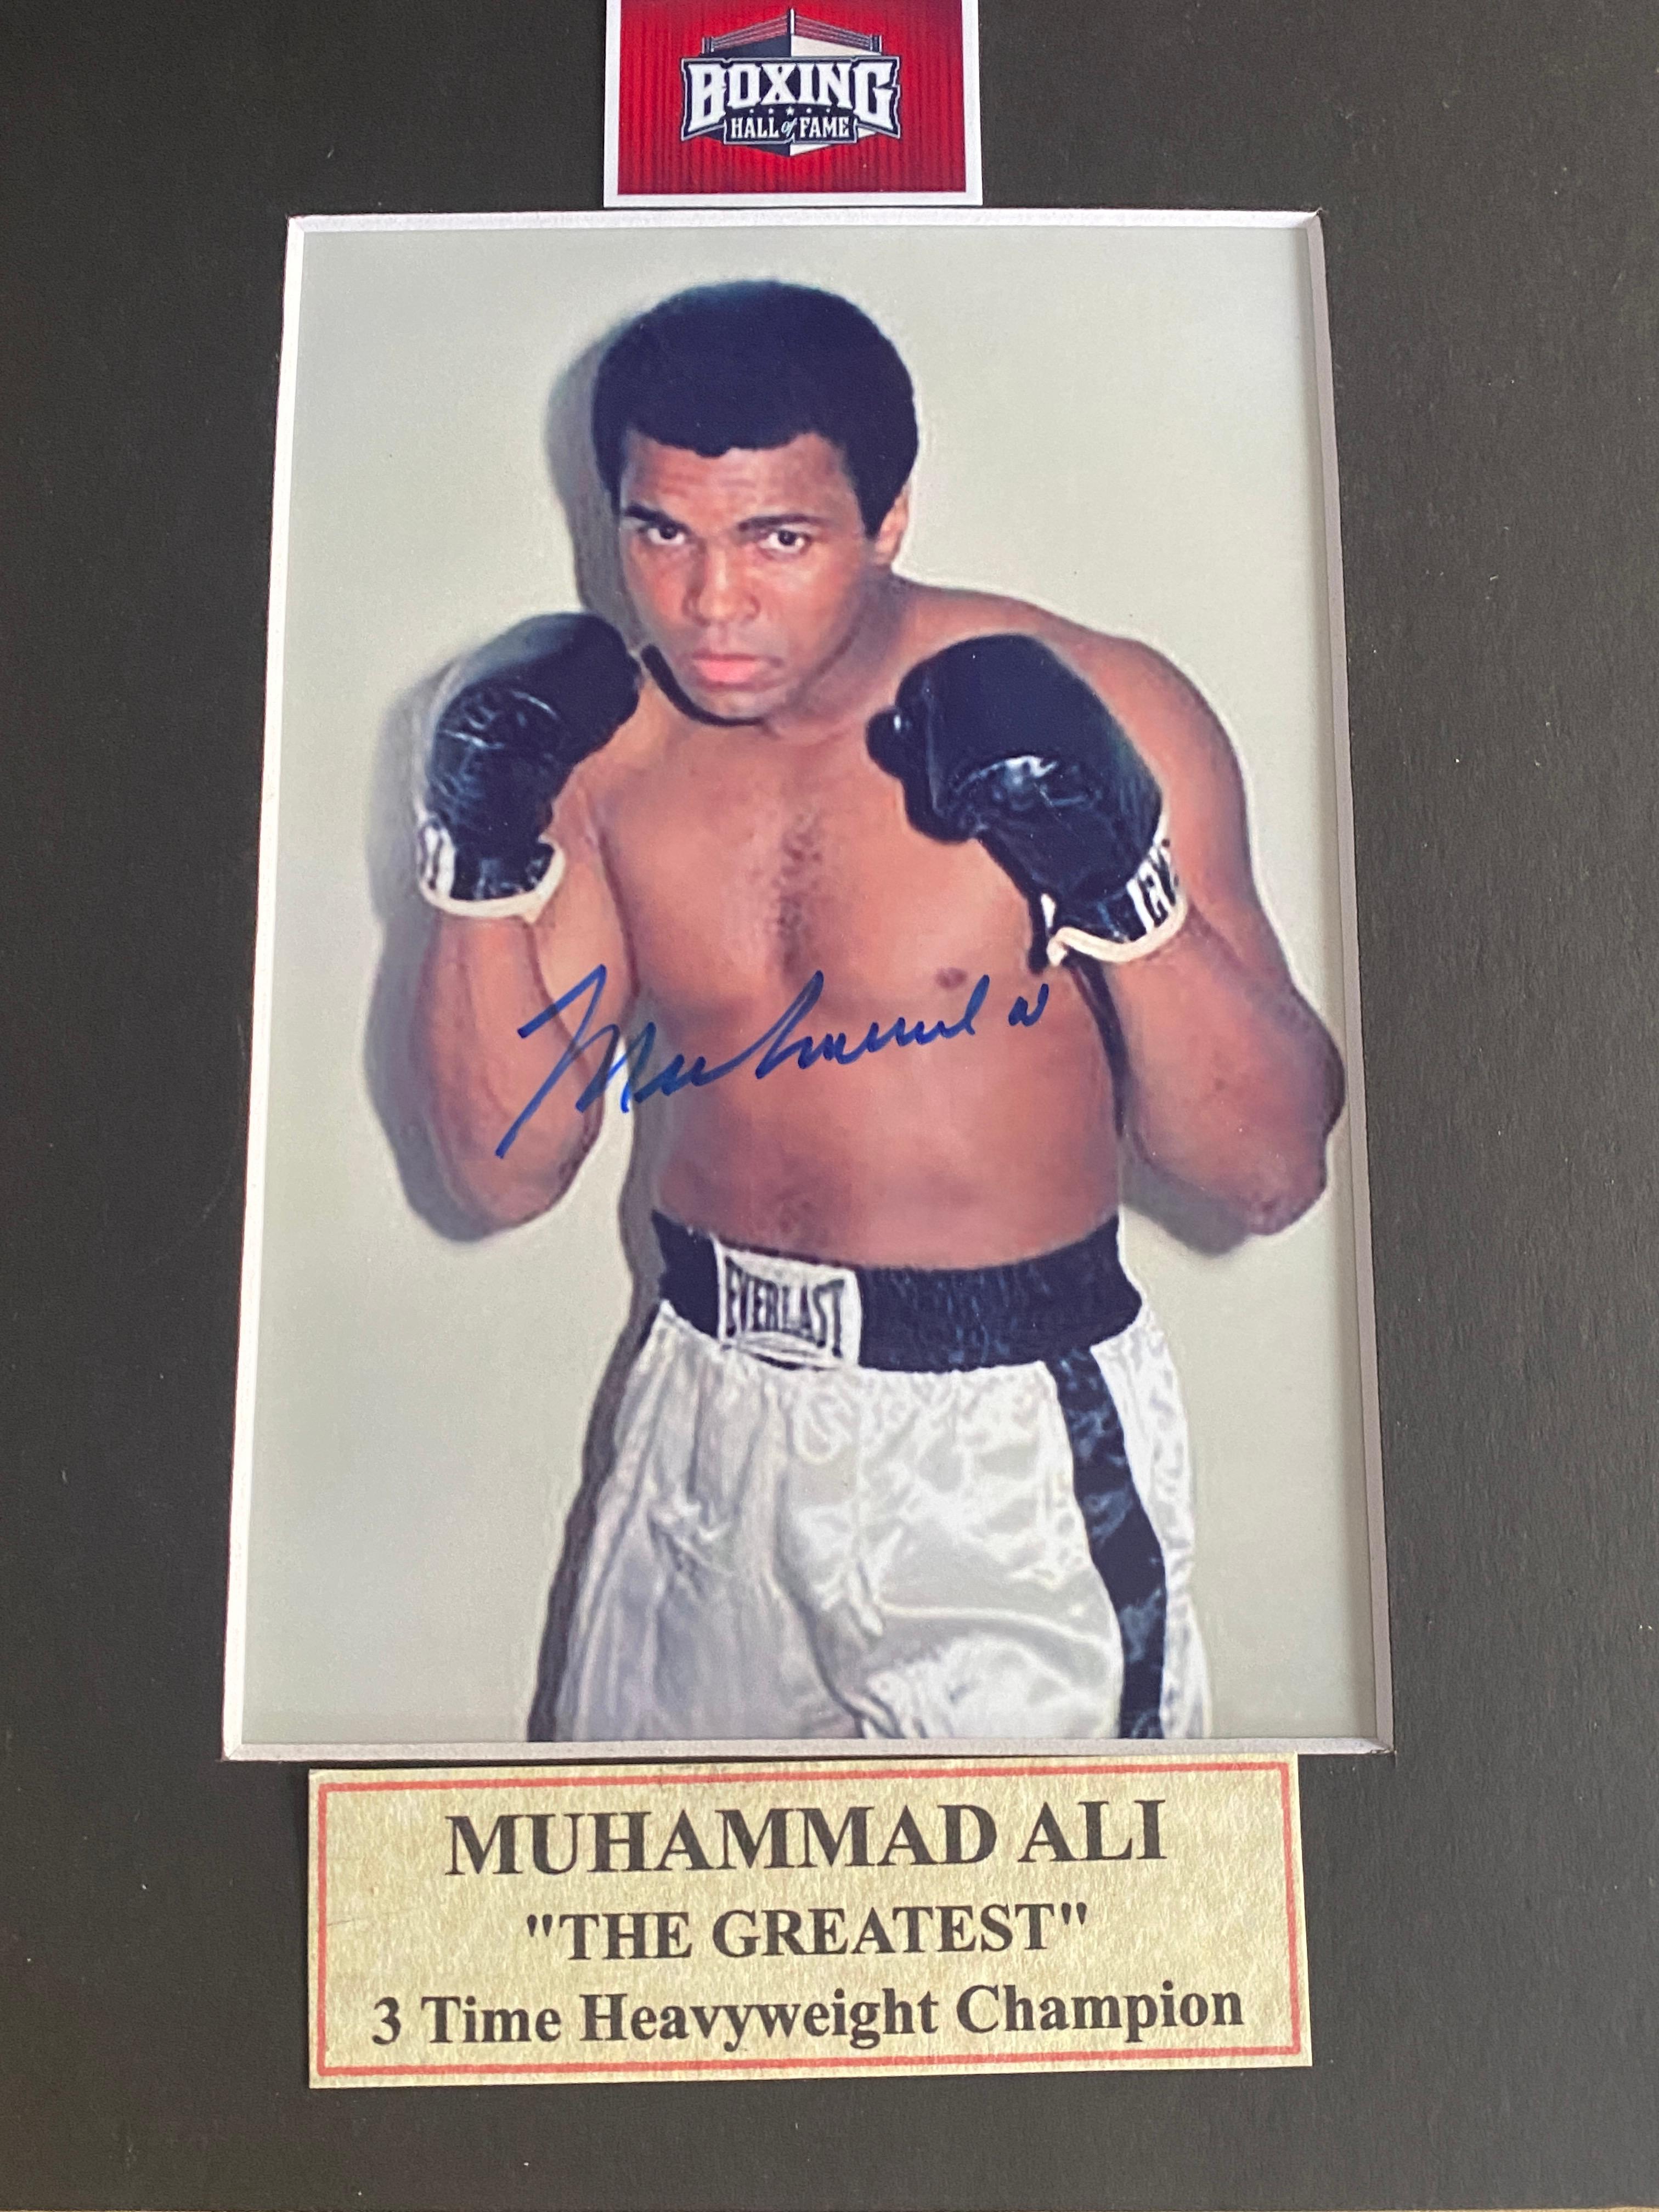 Lot of (5) Muhammad Ali signed 8” x 10” photos. These items are signed but not authenticated and are